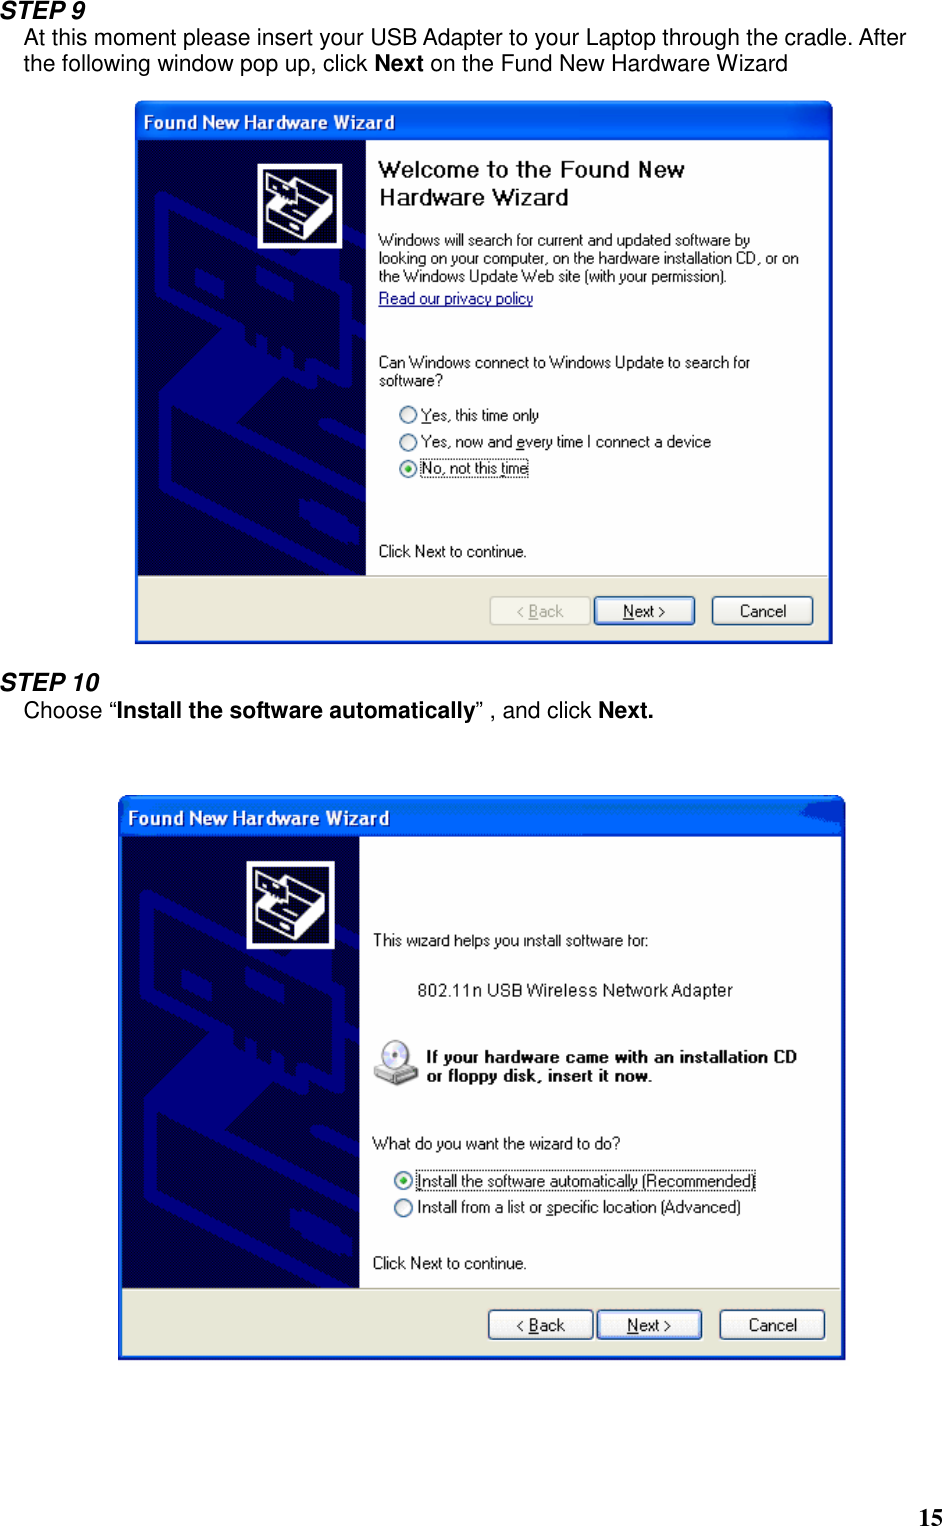  15 STEP 9 At this moment please insert your USB Adapter to your Laptop through the cradle. After the following window pop up, click Next on the Fund New Hardware Wizard    STEP 10 Choose “Install the software automatically” , and click Next.        